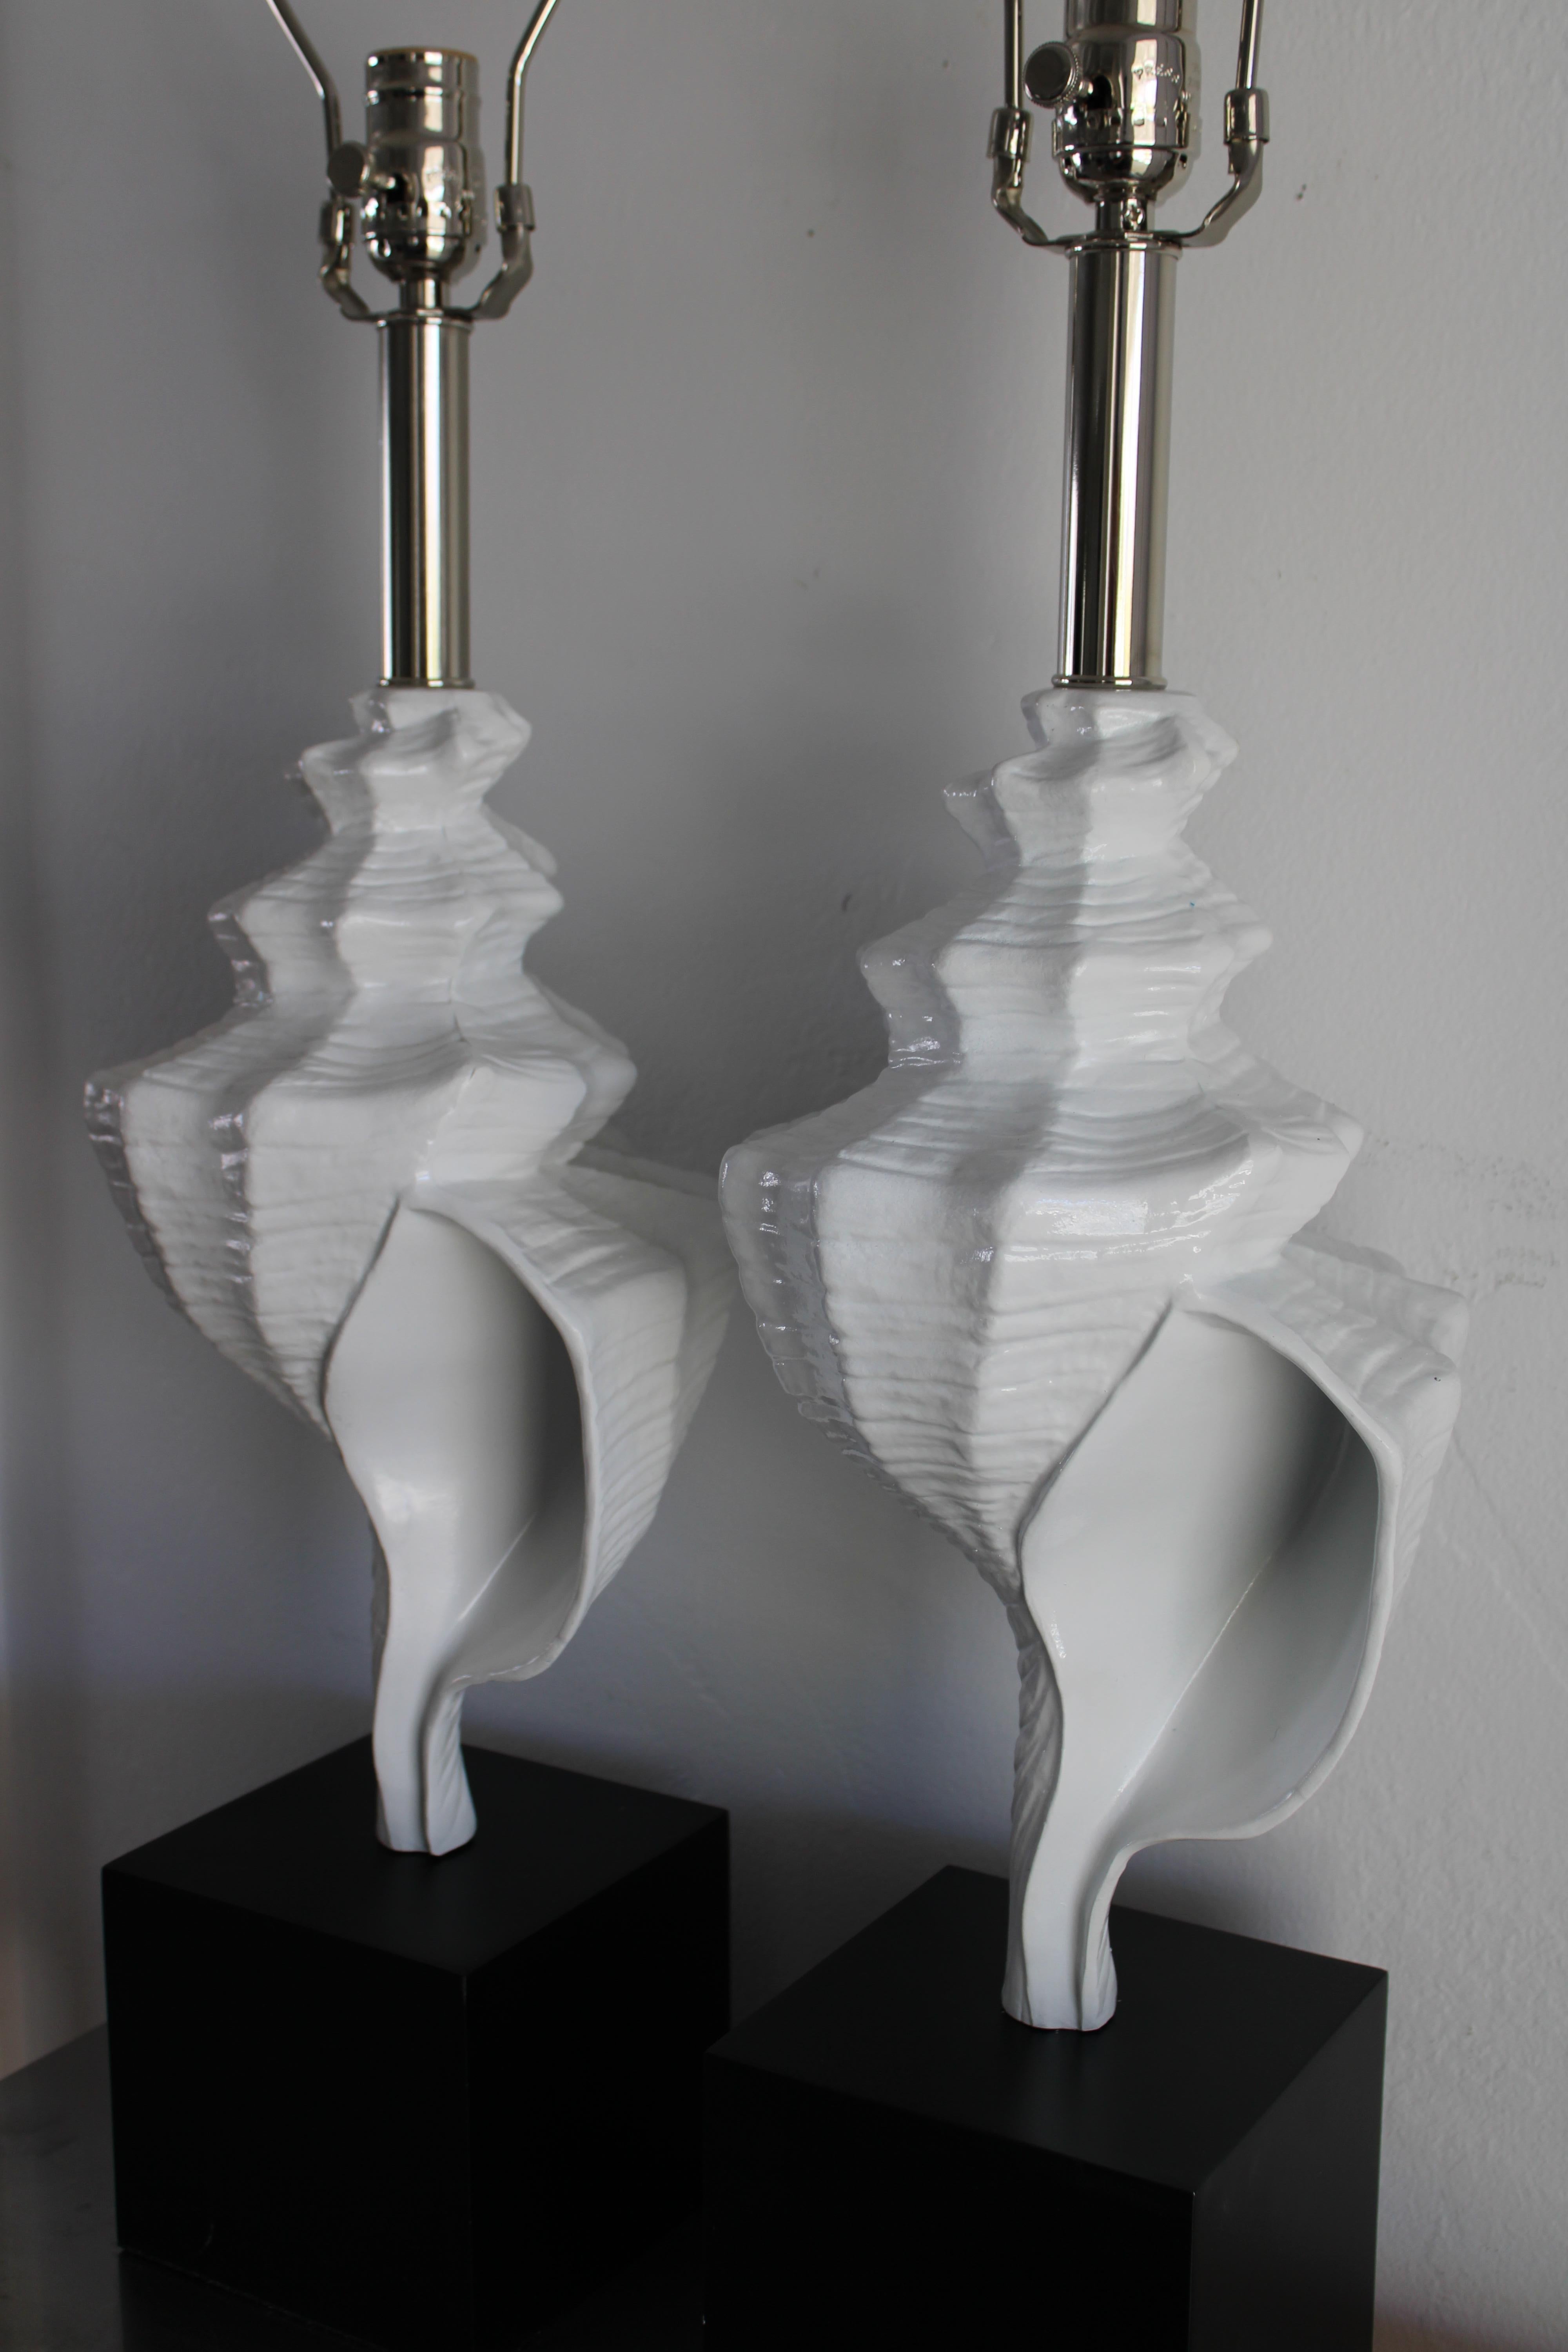 Mid-Century Modern Pair of Aluminum Seashell Lamps Attributed to the Laurel Lamp Co.